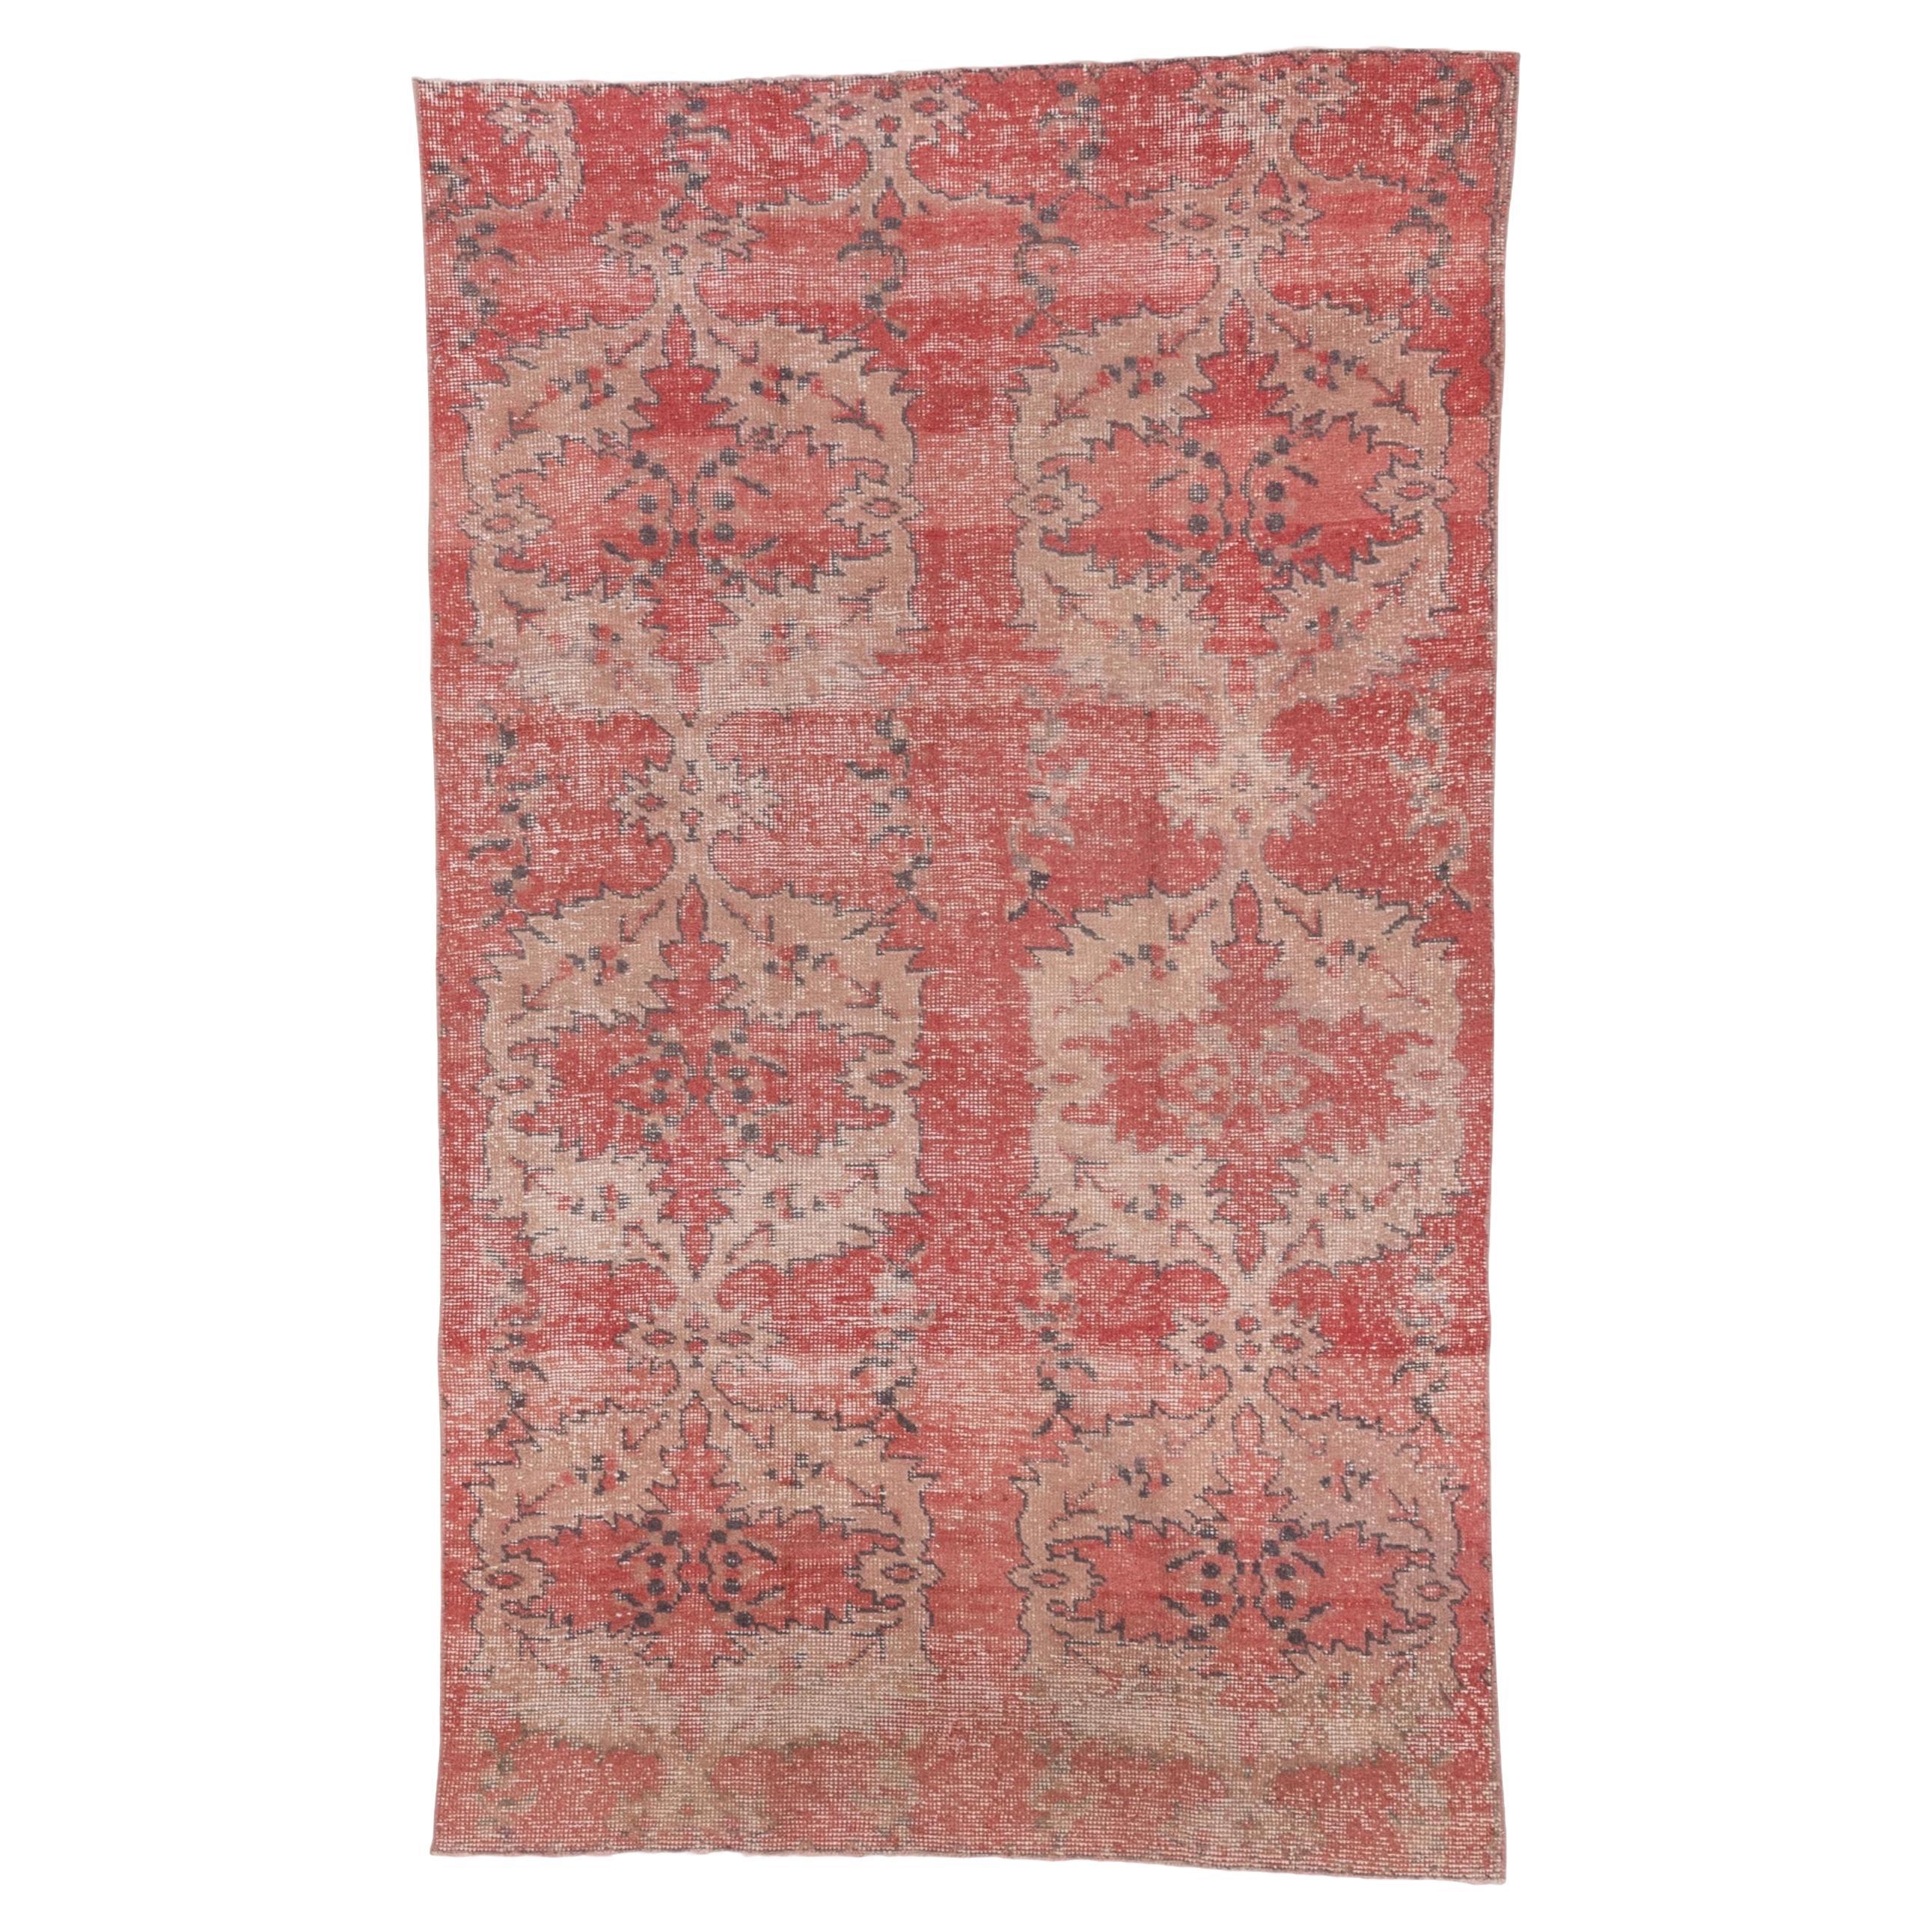 Turkish Faded Red Rug with Geometric Patterns Across